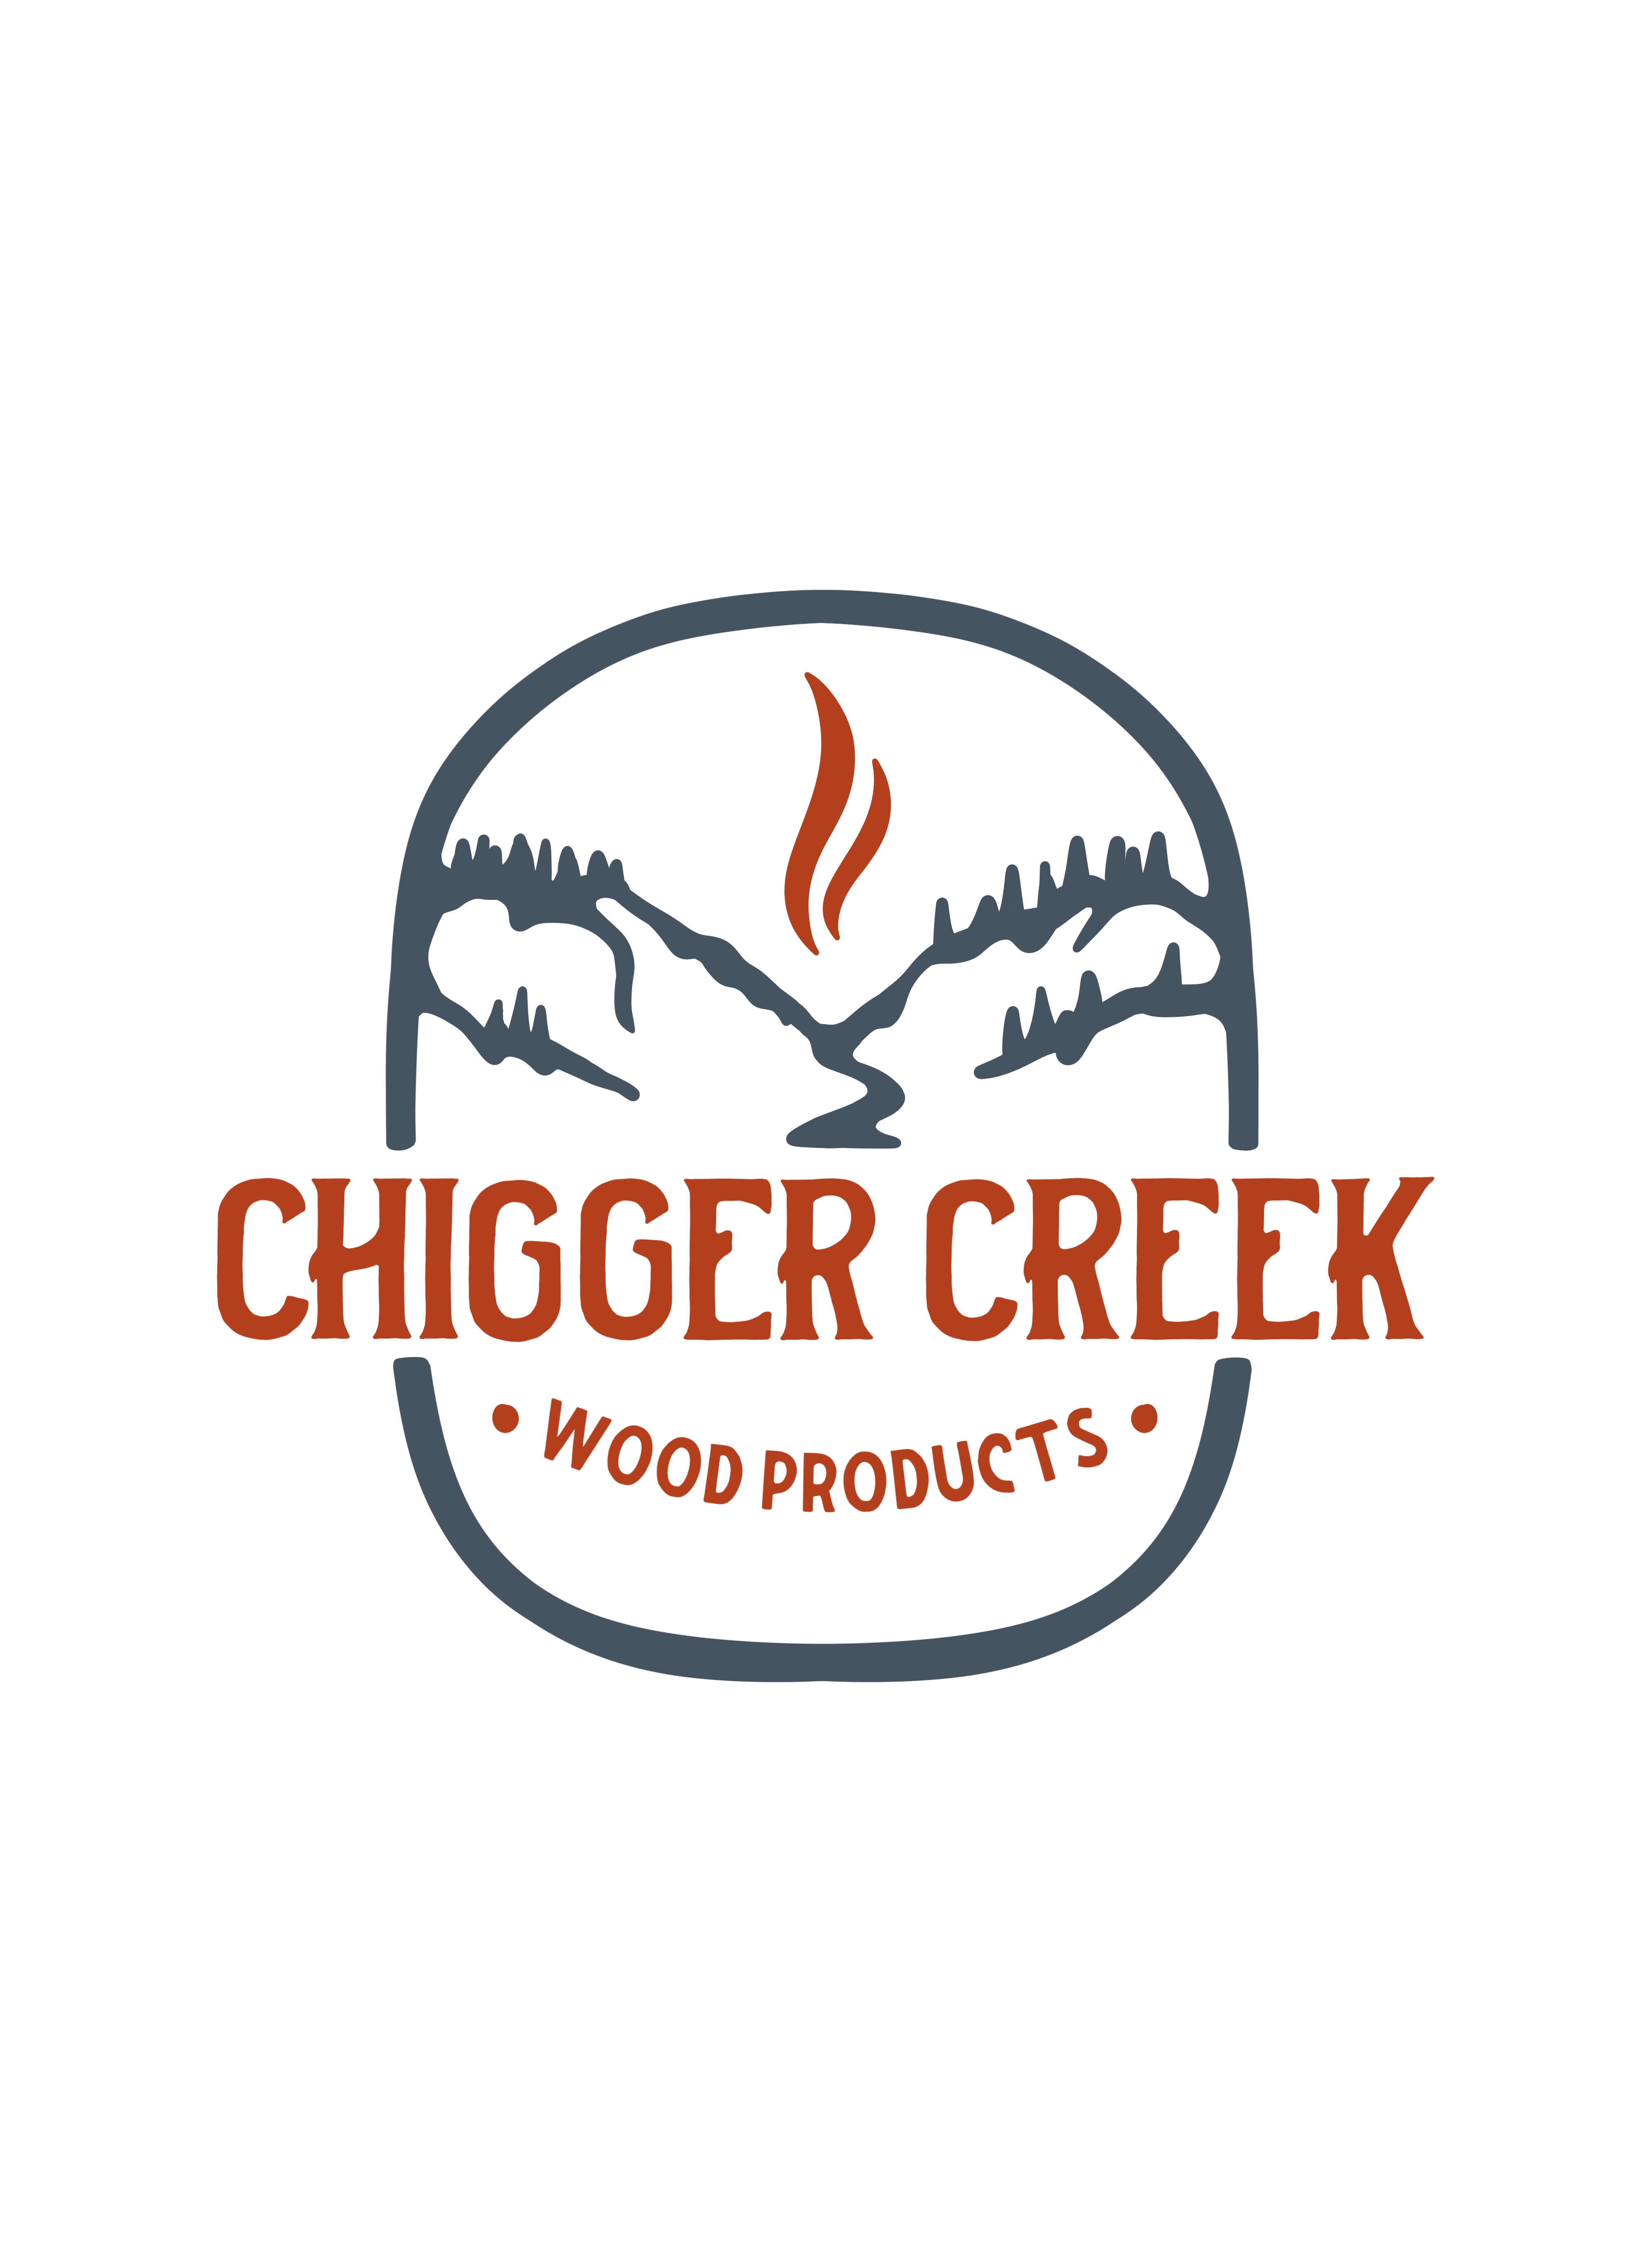 Sweet 'n Smoky - Chigger Creek Wood Products